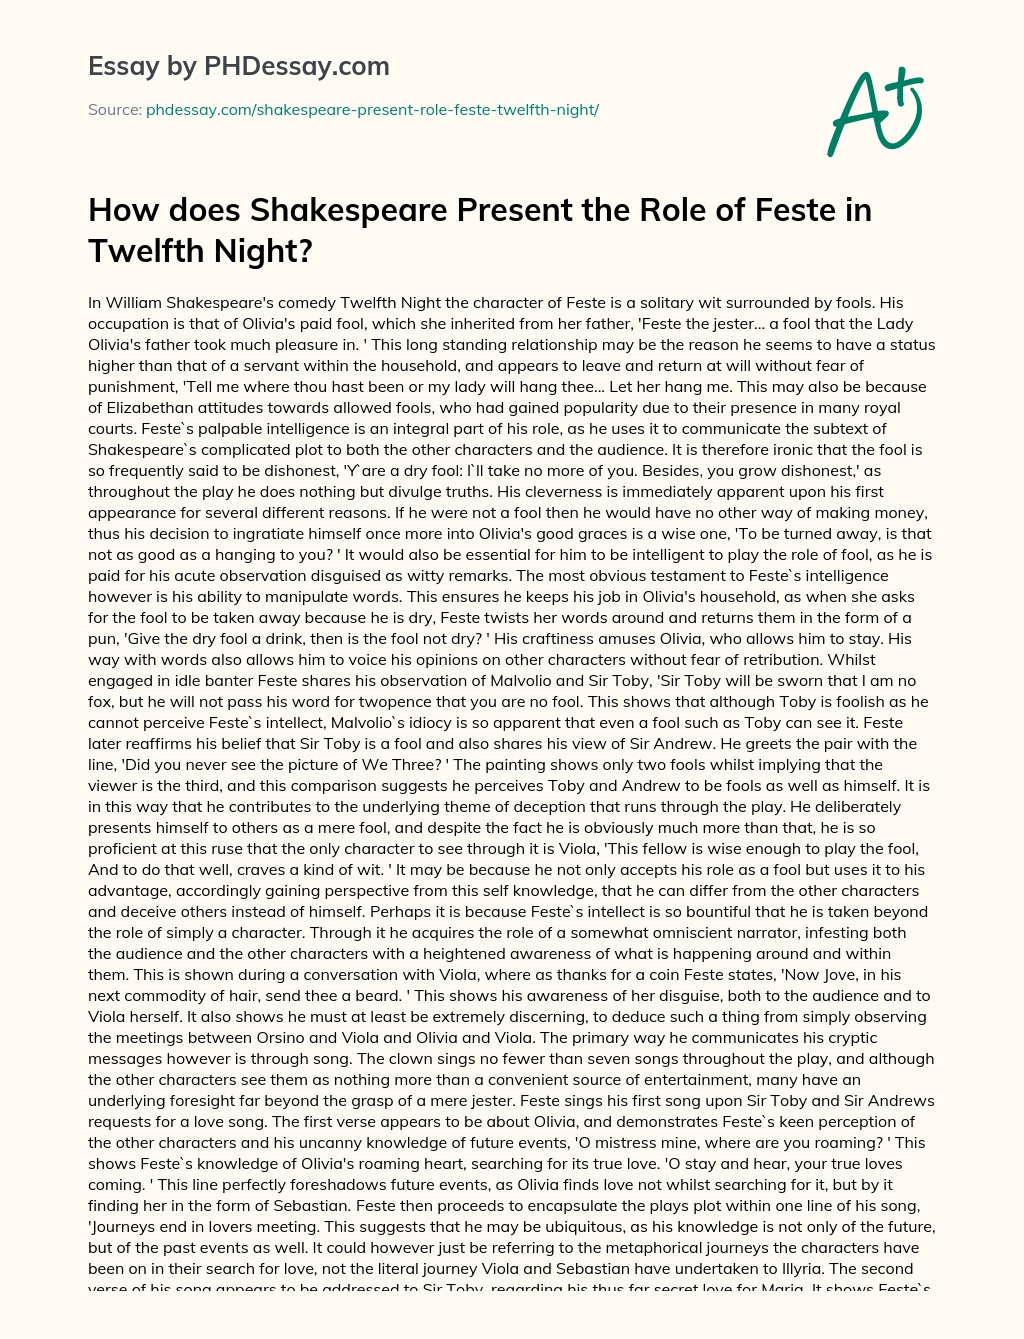 How does Shakespeare Present the Role of Feste in Twelfth Night? essay